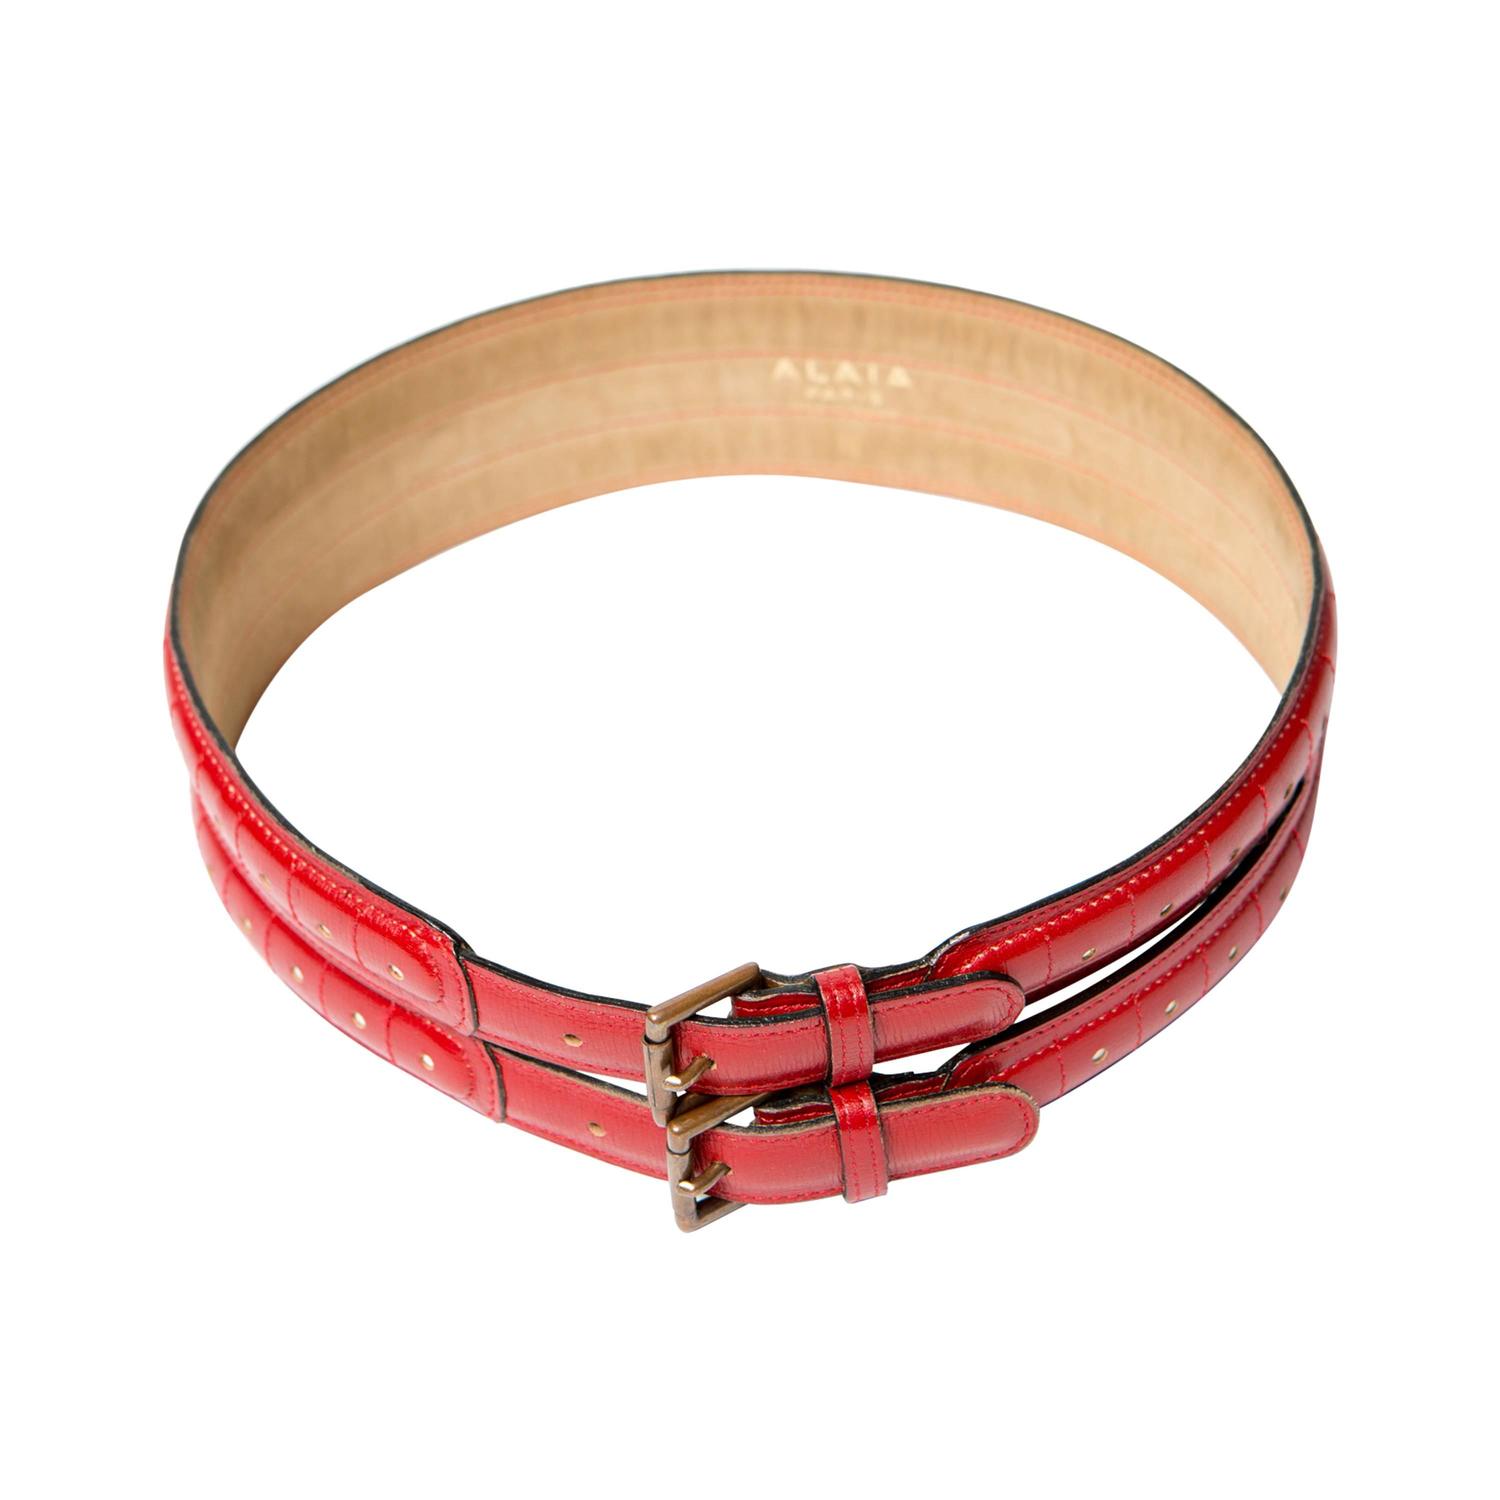 1990s ALAIA Red Leather Corset Belt at 1stdibs